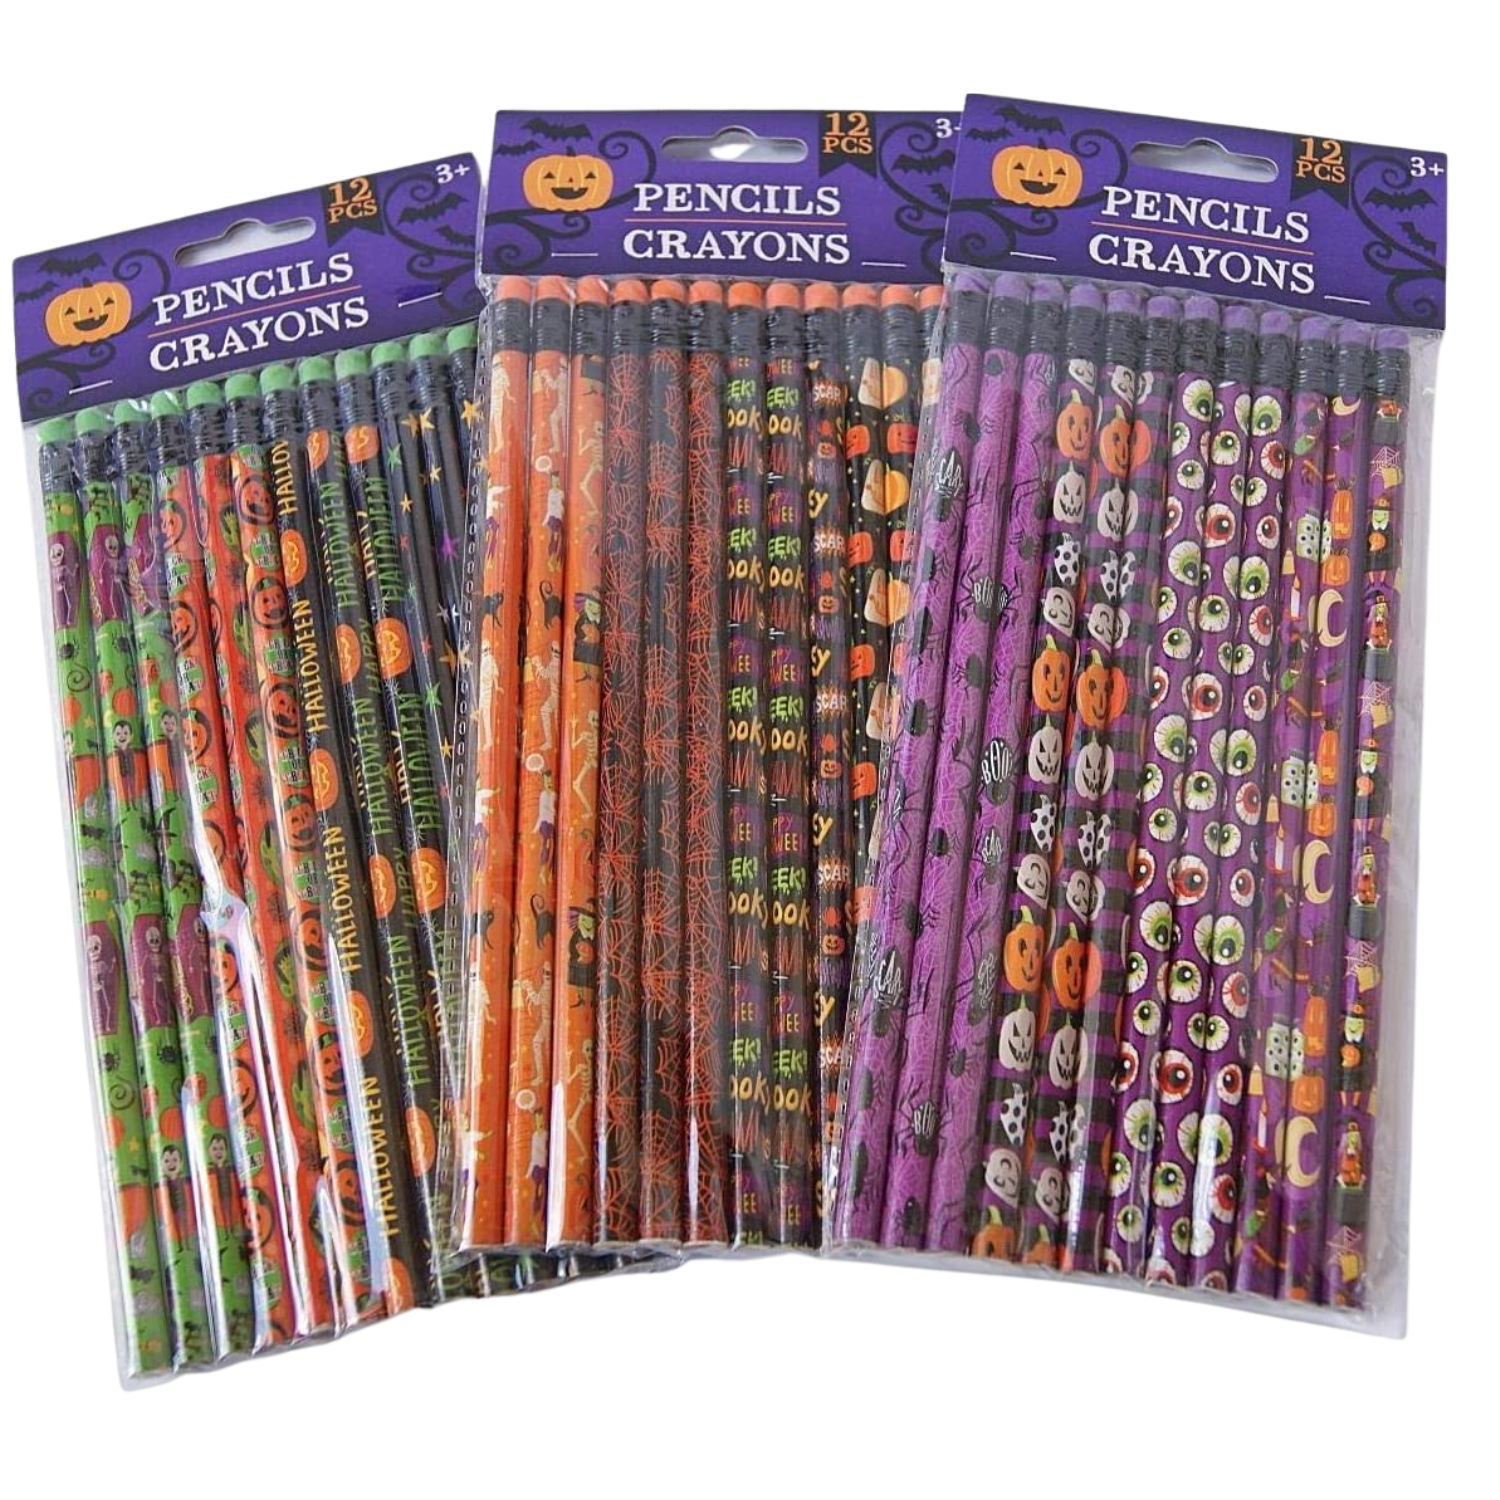  50 Pieces Halloween Pencils Scented Pencils School Pencils 10  style Smelly Pencils Colorful Pencils with Fruit Elements for Teachers  Classrooms Reward Halloween Party Kids Gifts Supplie (50) : Office Products